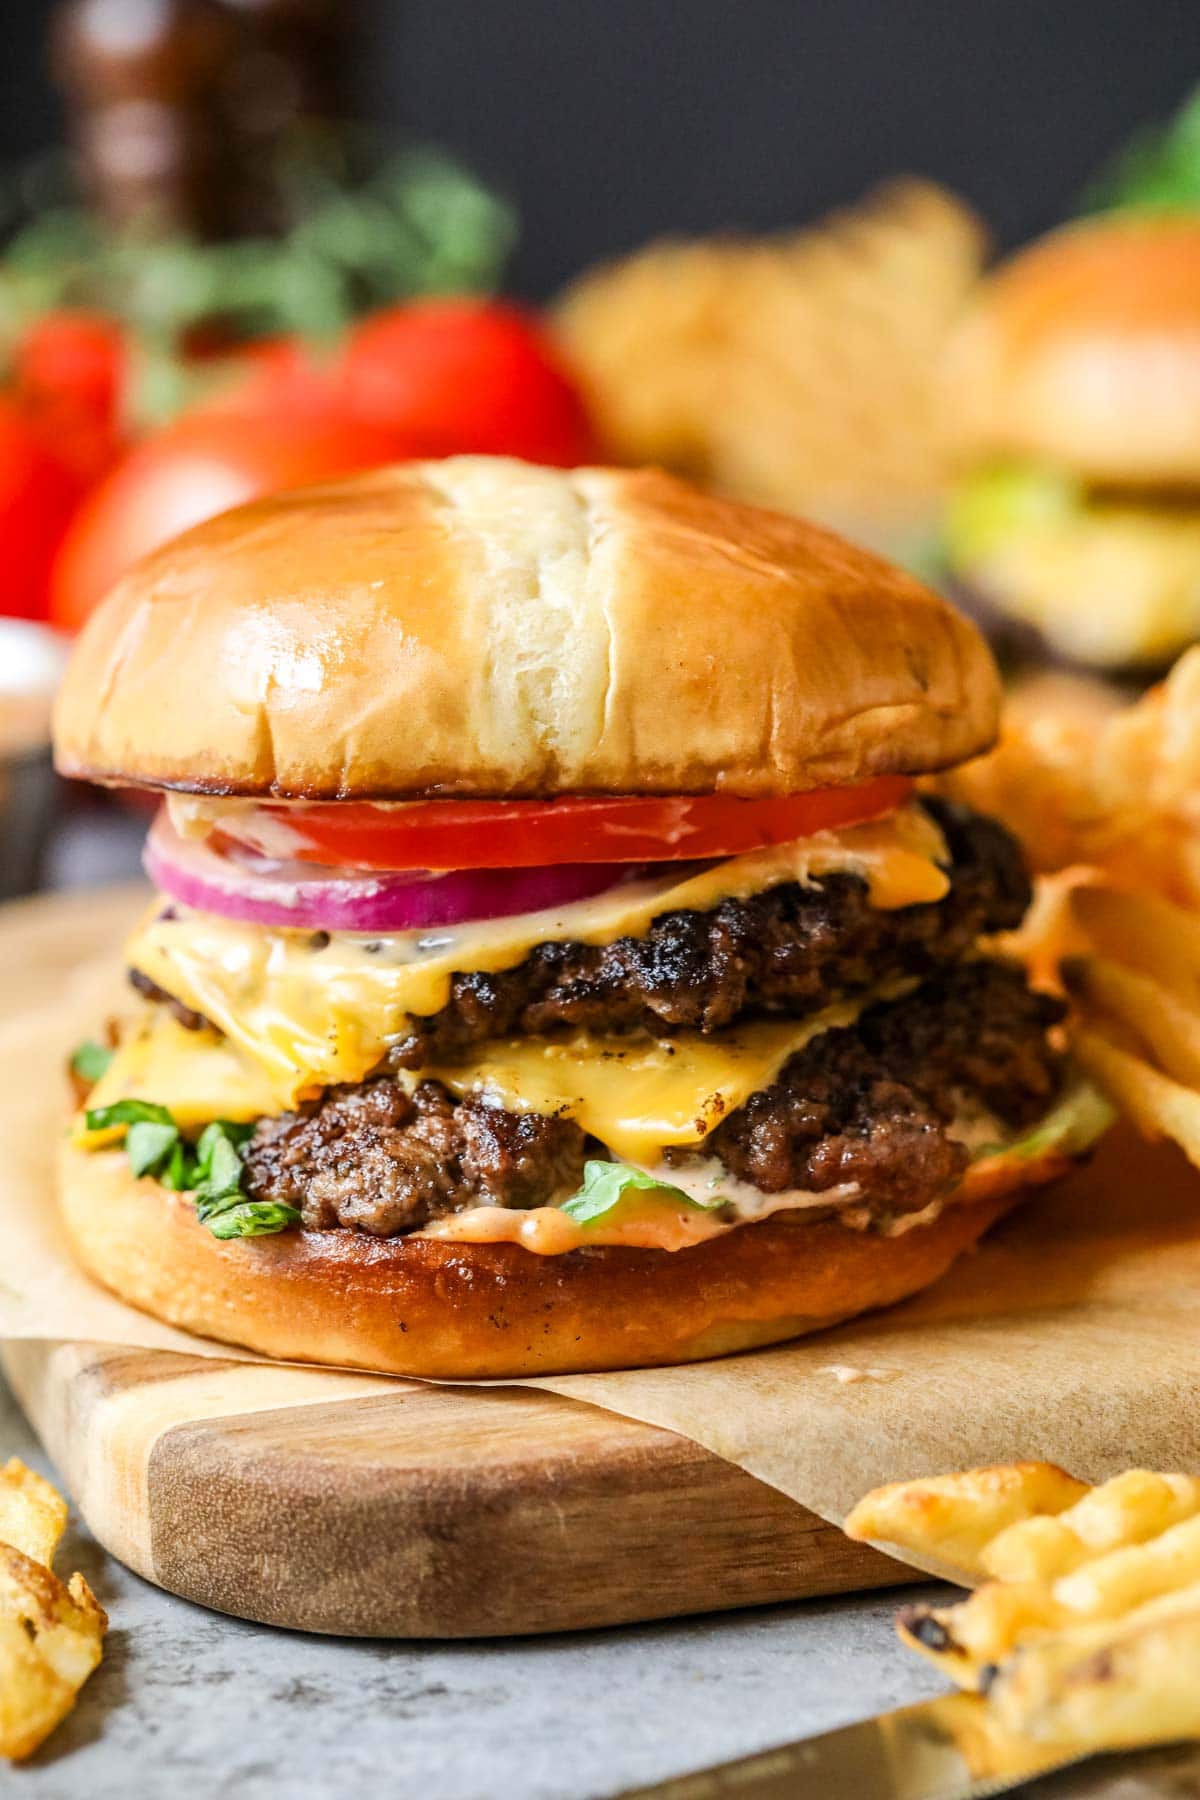 Smash burger topped with American cheese, onion, tomato, and lettuce.